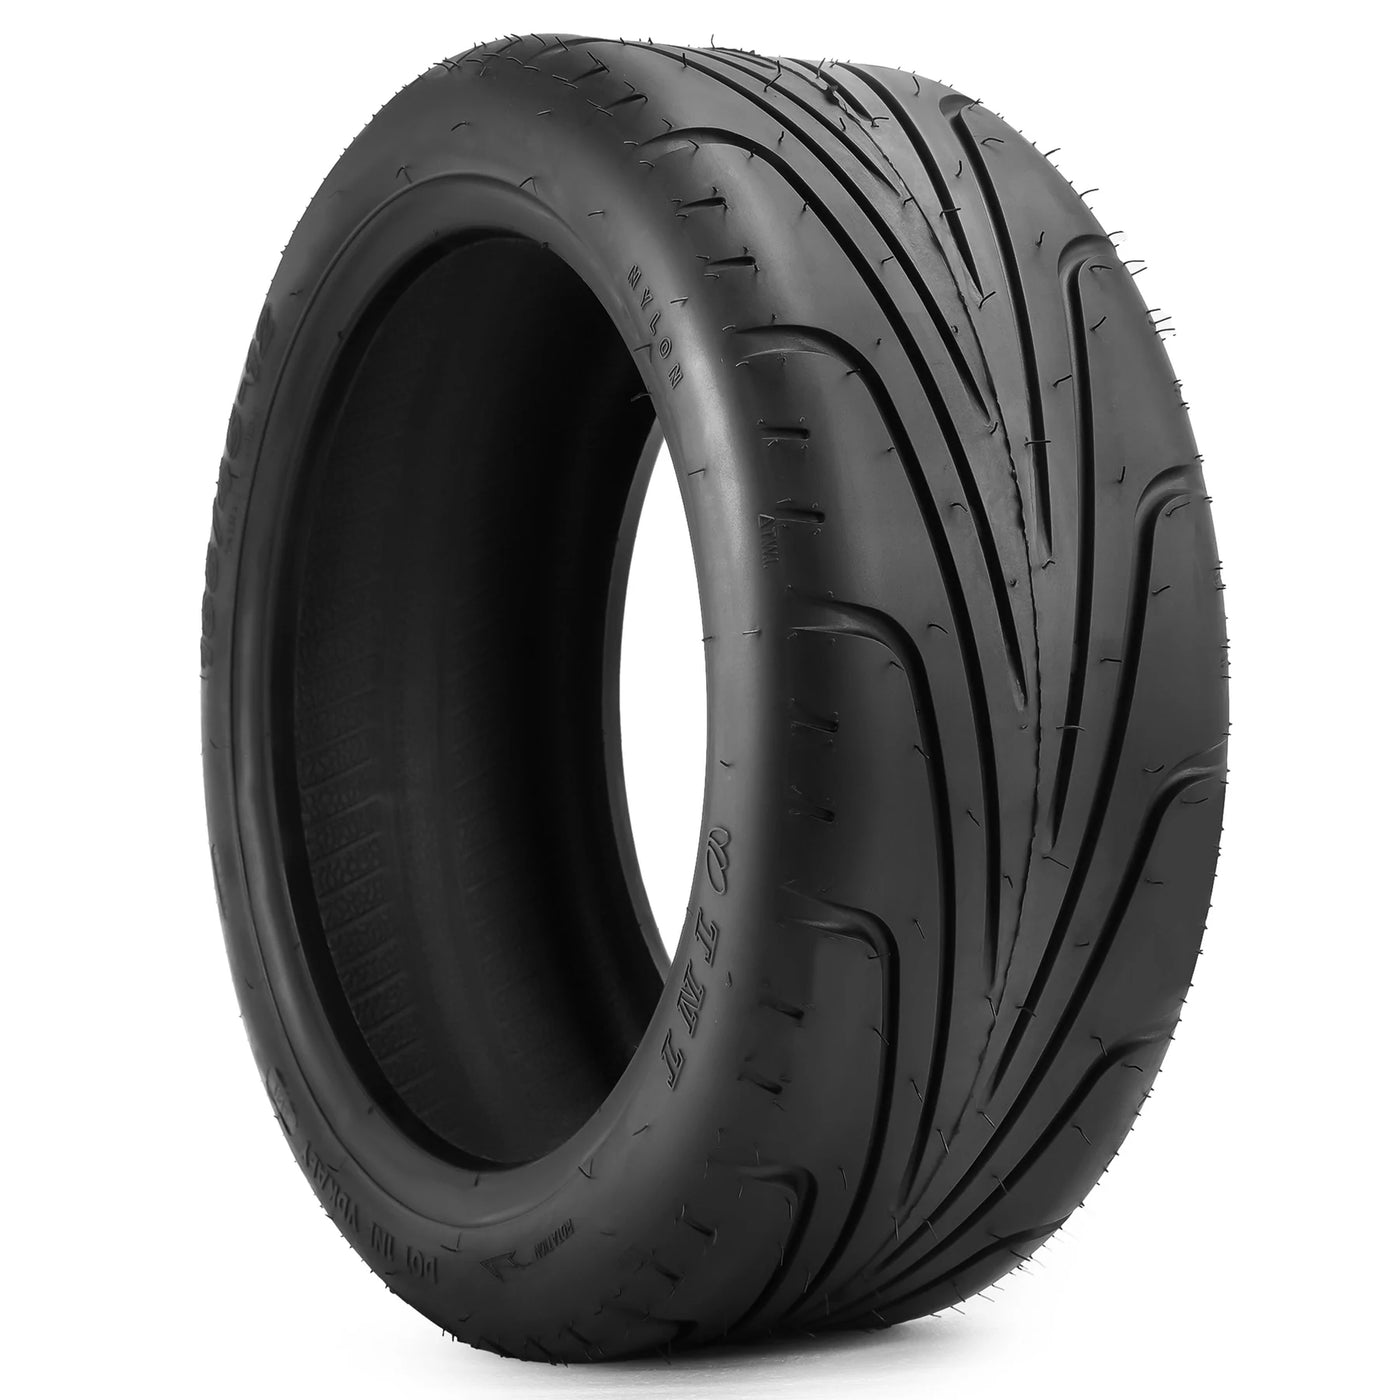 SoverSky Vaccum Wide Tire for Chopper fat tire scooter